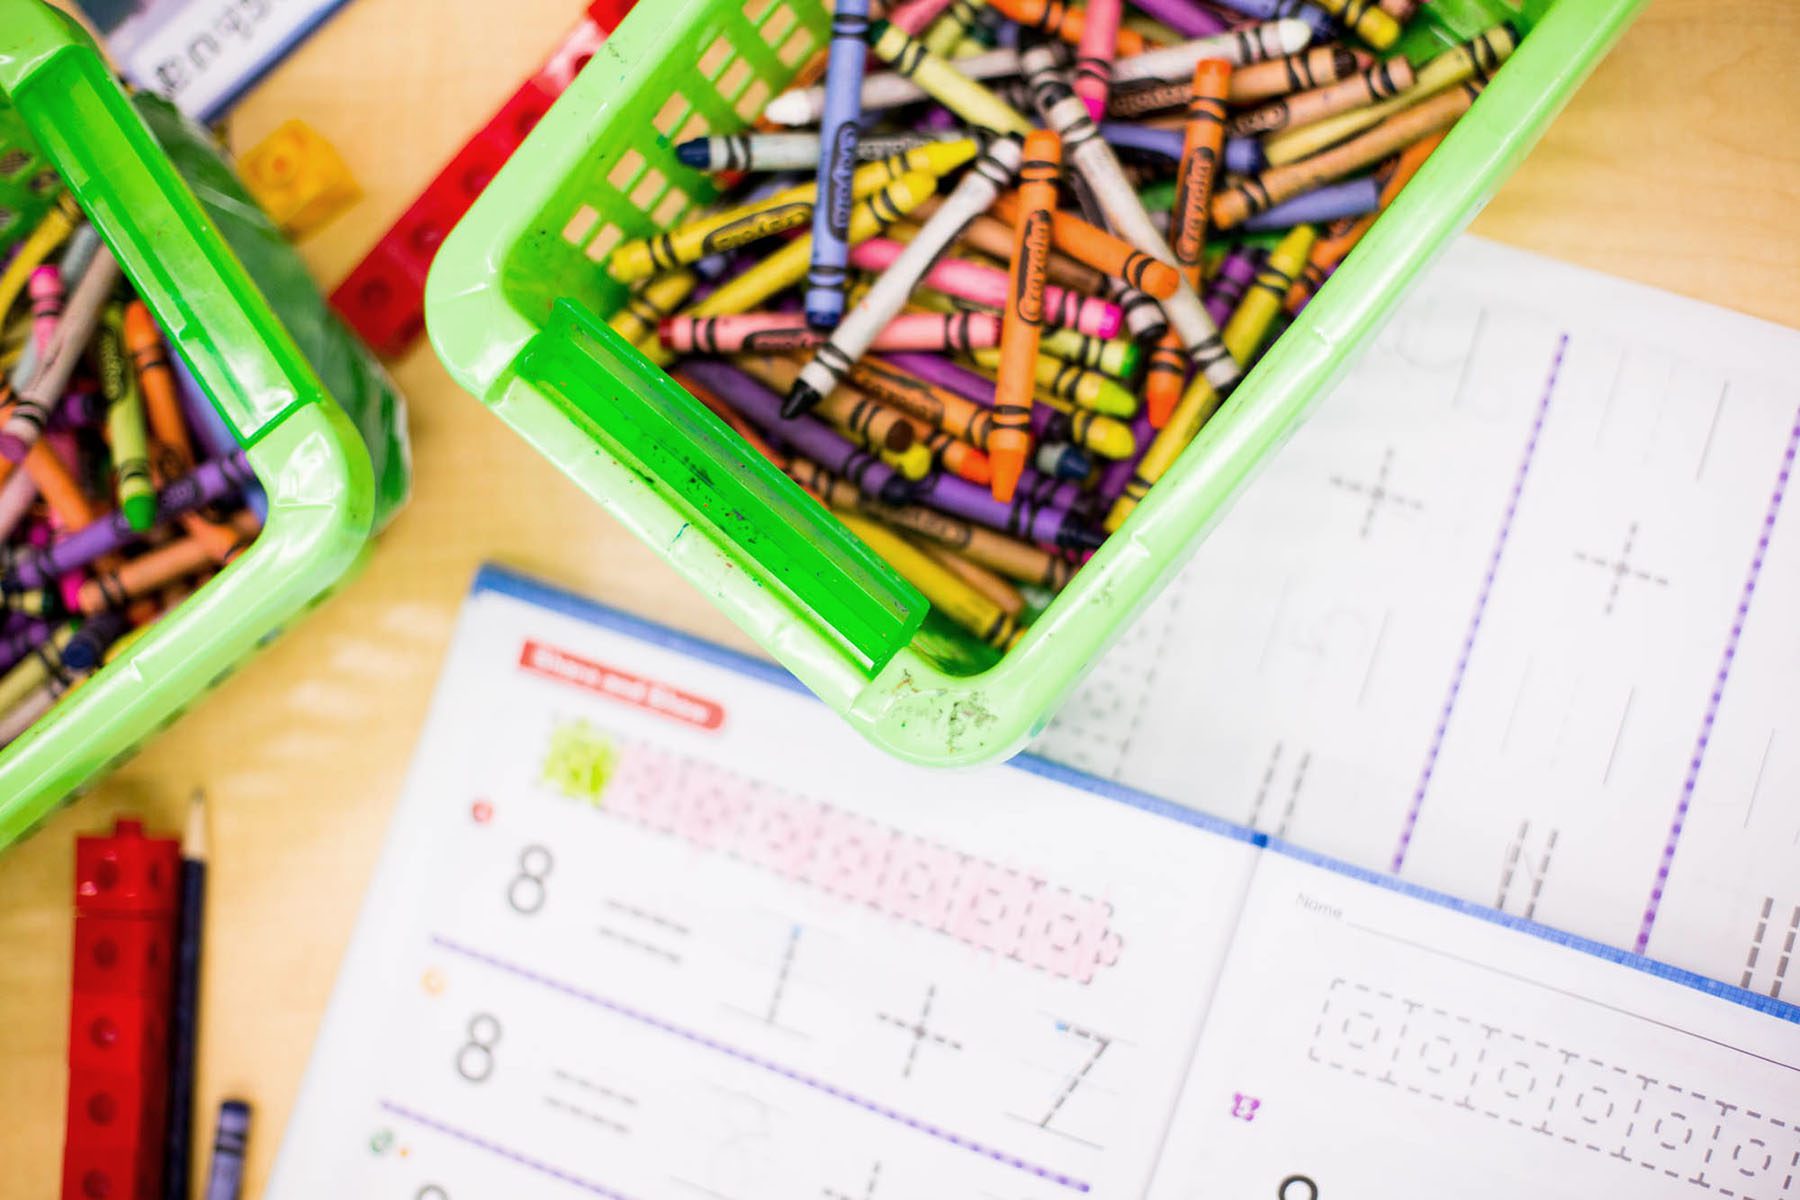 Color crayons and math exercise books are seen in a classroom